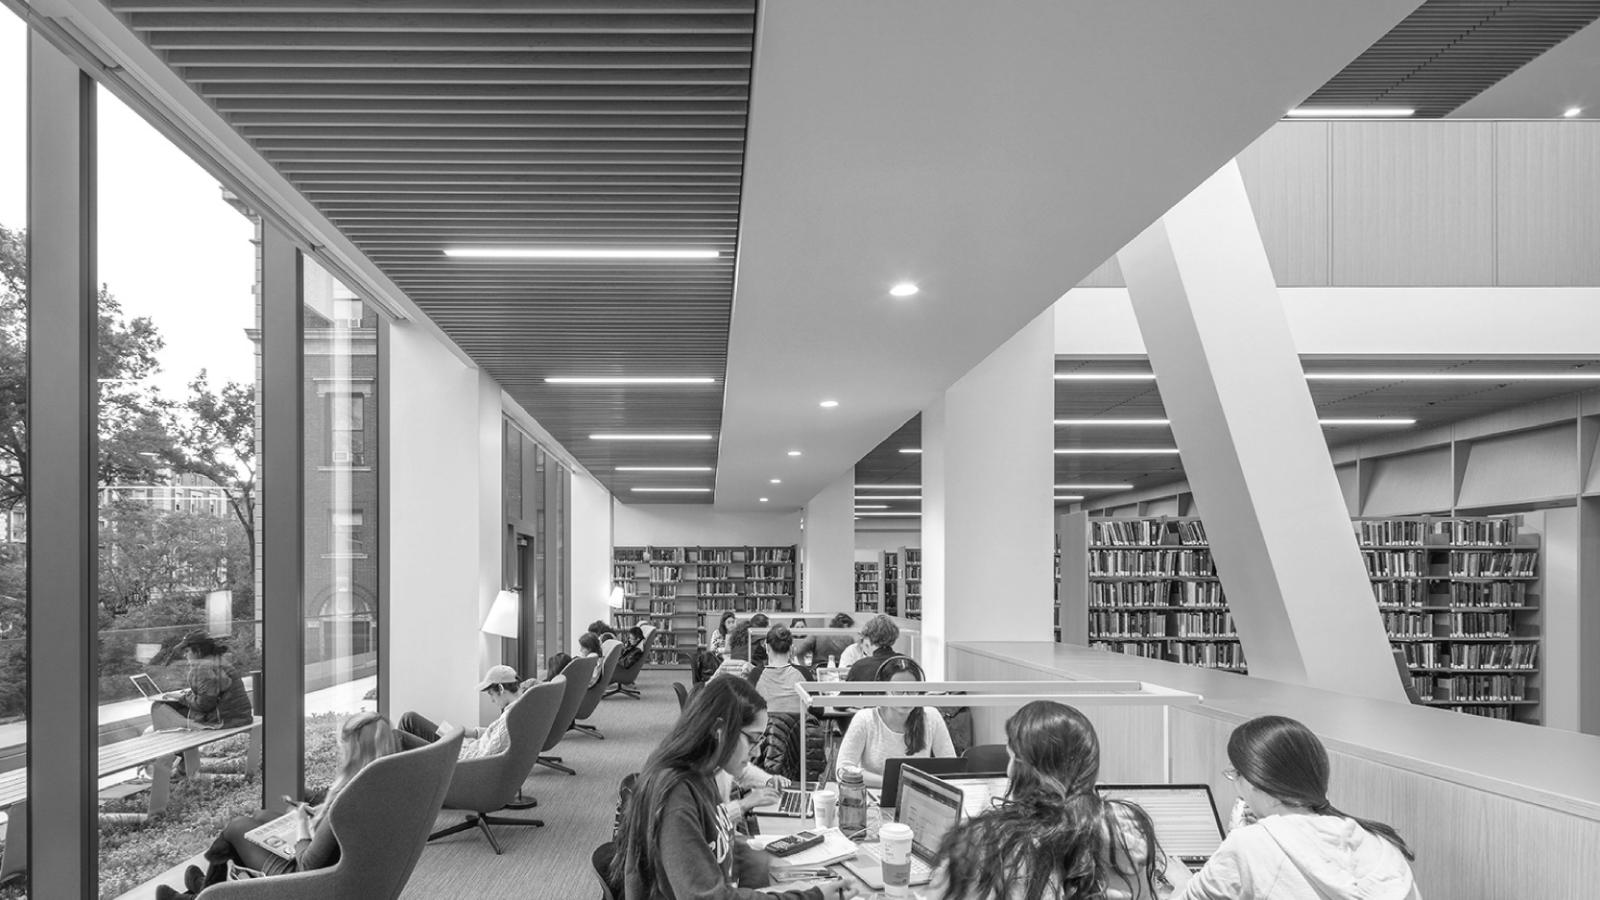 Barnard's library, interior showing students studying